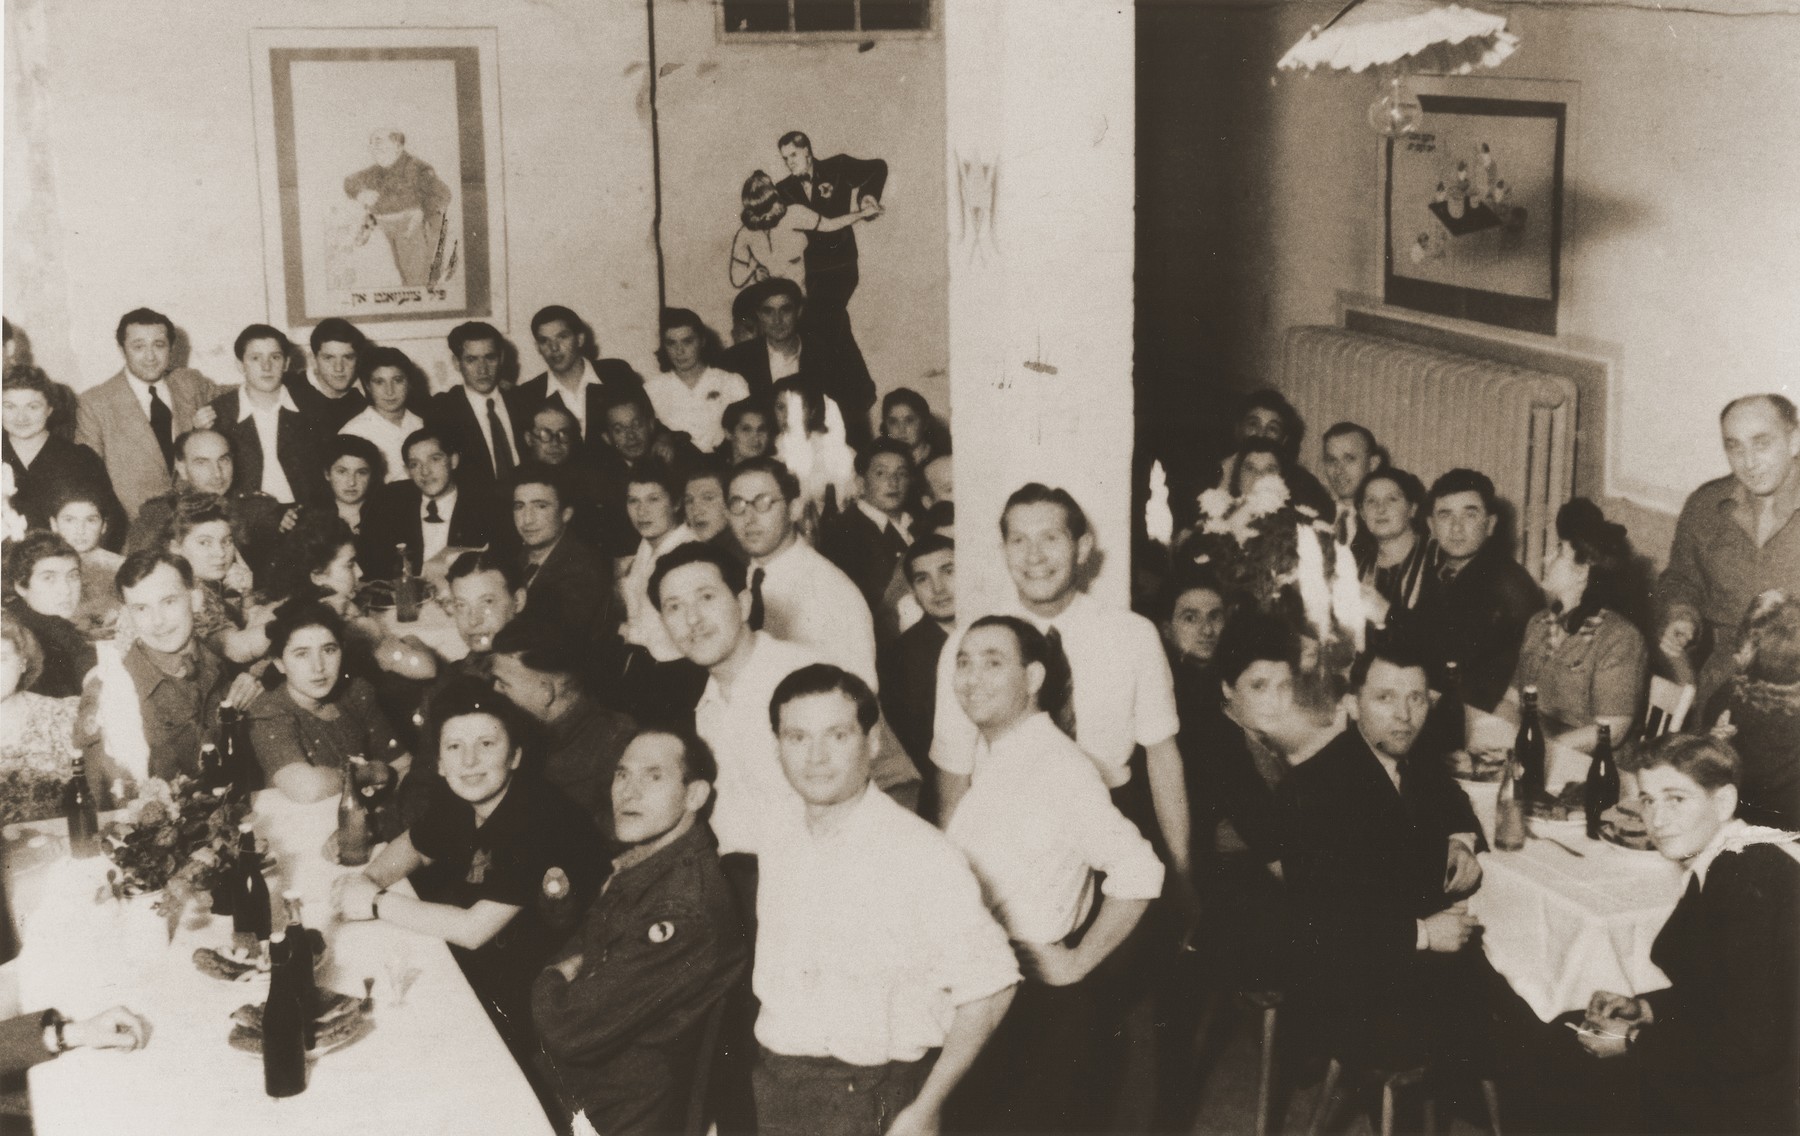 Jewish residents and British soldiers attend a party in the Vinnhorst displaced persons center.

Included in the photo are Manek Lipke. Halinka Lipke, Nadia, Tola Pilcewicz, Herman Zelman, Chaska Lipke, Monya Sender and Kapelusz. The latter was drowned in a lake after being forcibly held underwater by antisemtiic German boys.